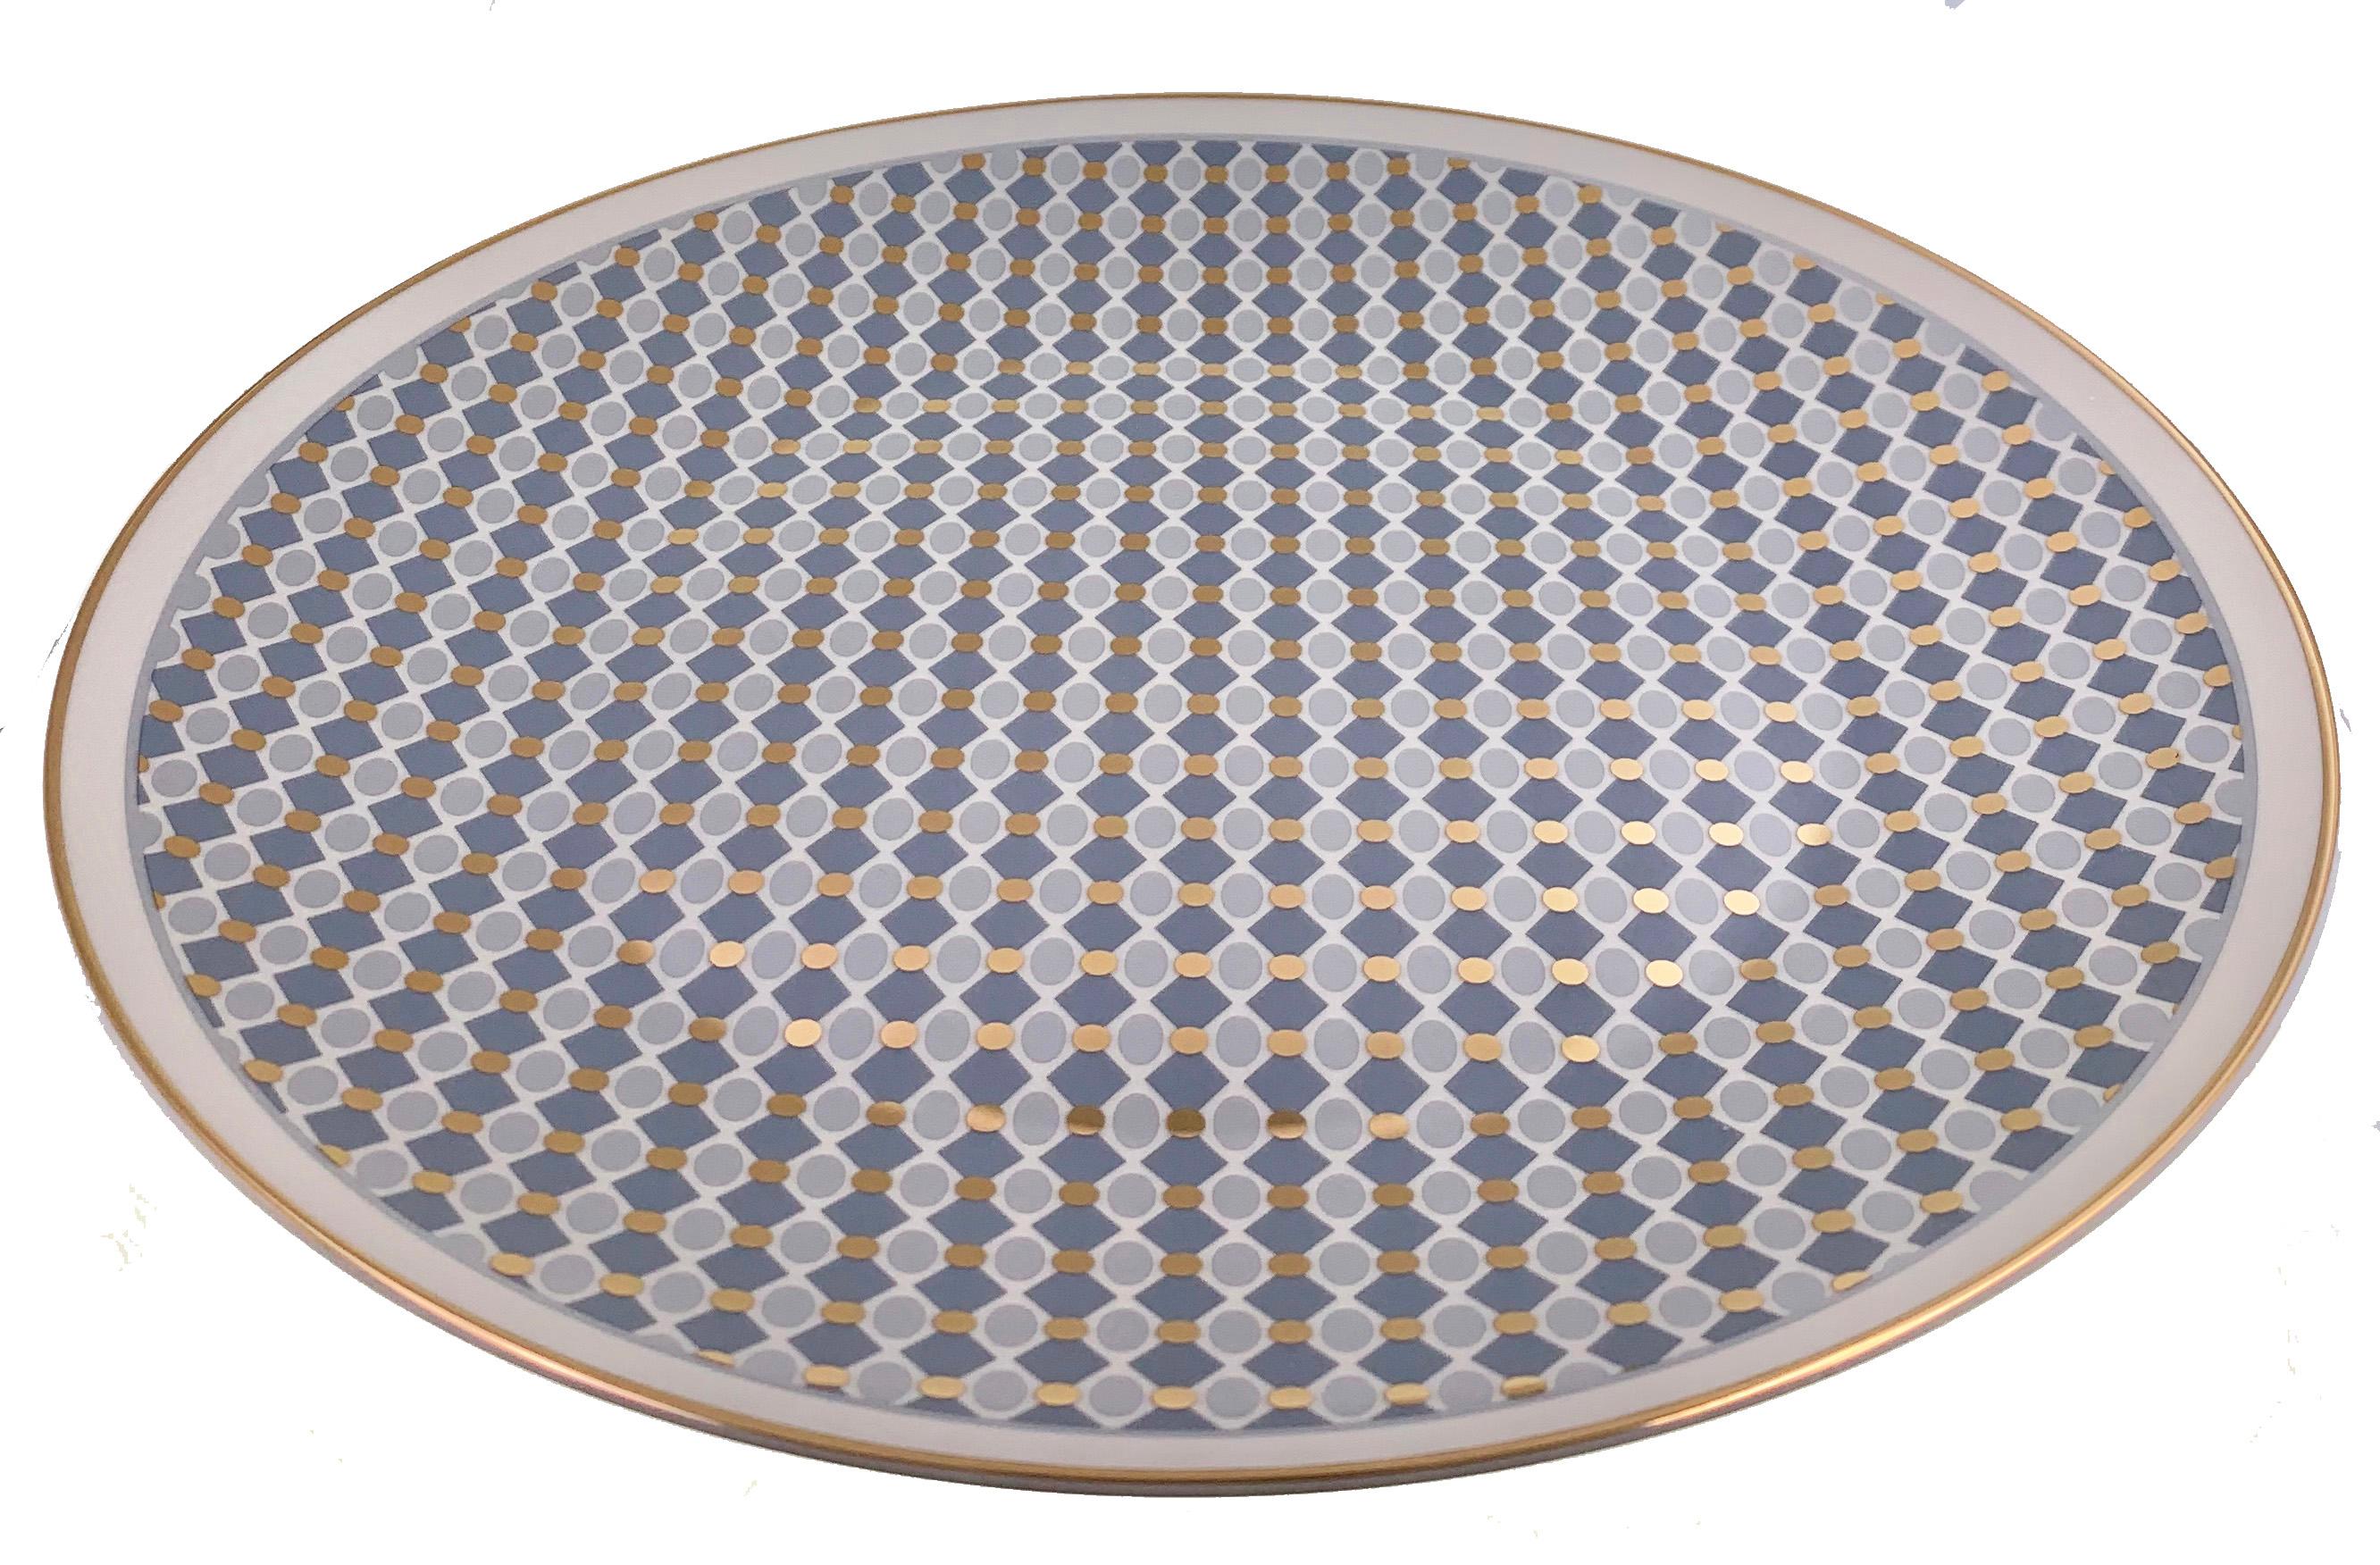 Larger quantities available upon request, with 8 weeks production time.

Description: Large round serving plate
Color: Blue and gold
Size: 37Ø x 3H cm
Material: Porcelain and gold
Collection: Modern Vintage